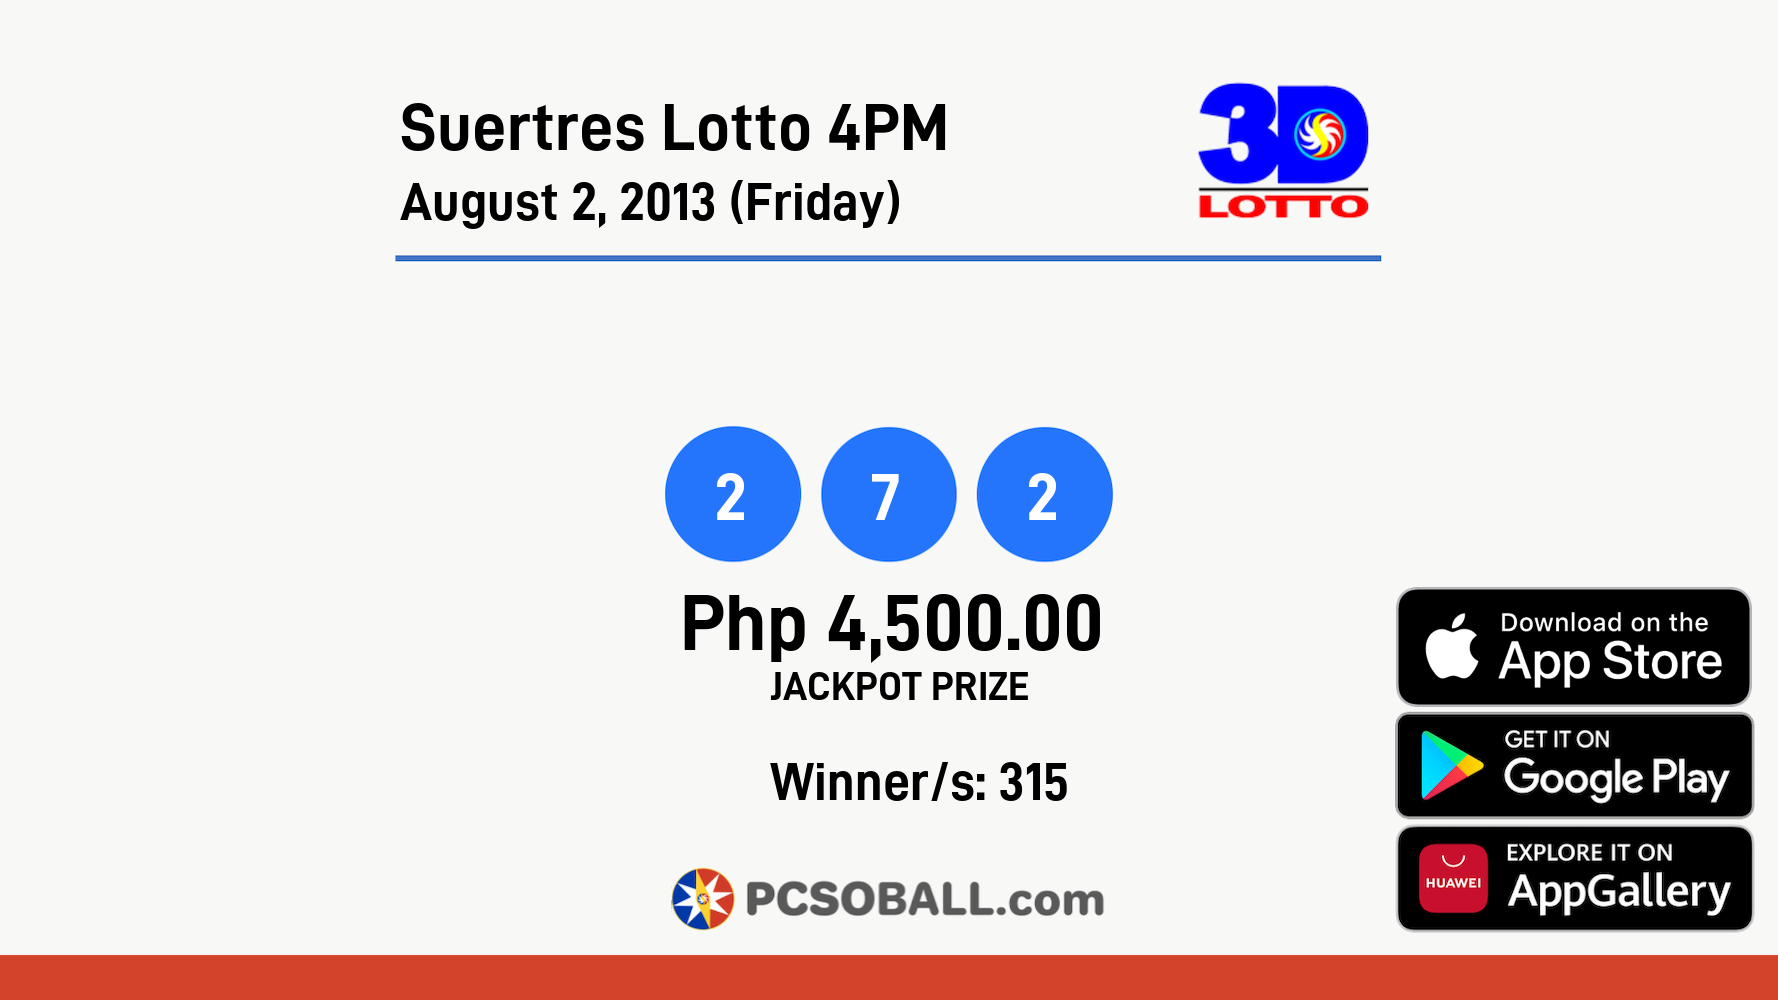 Suertres Lotto 4PM August 2, 2013 (Friday) Result